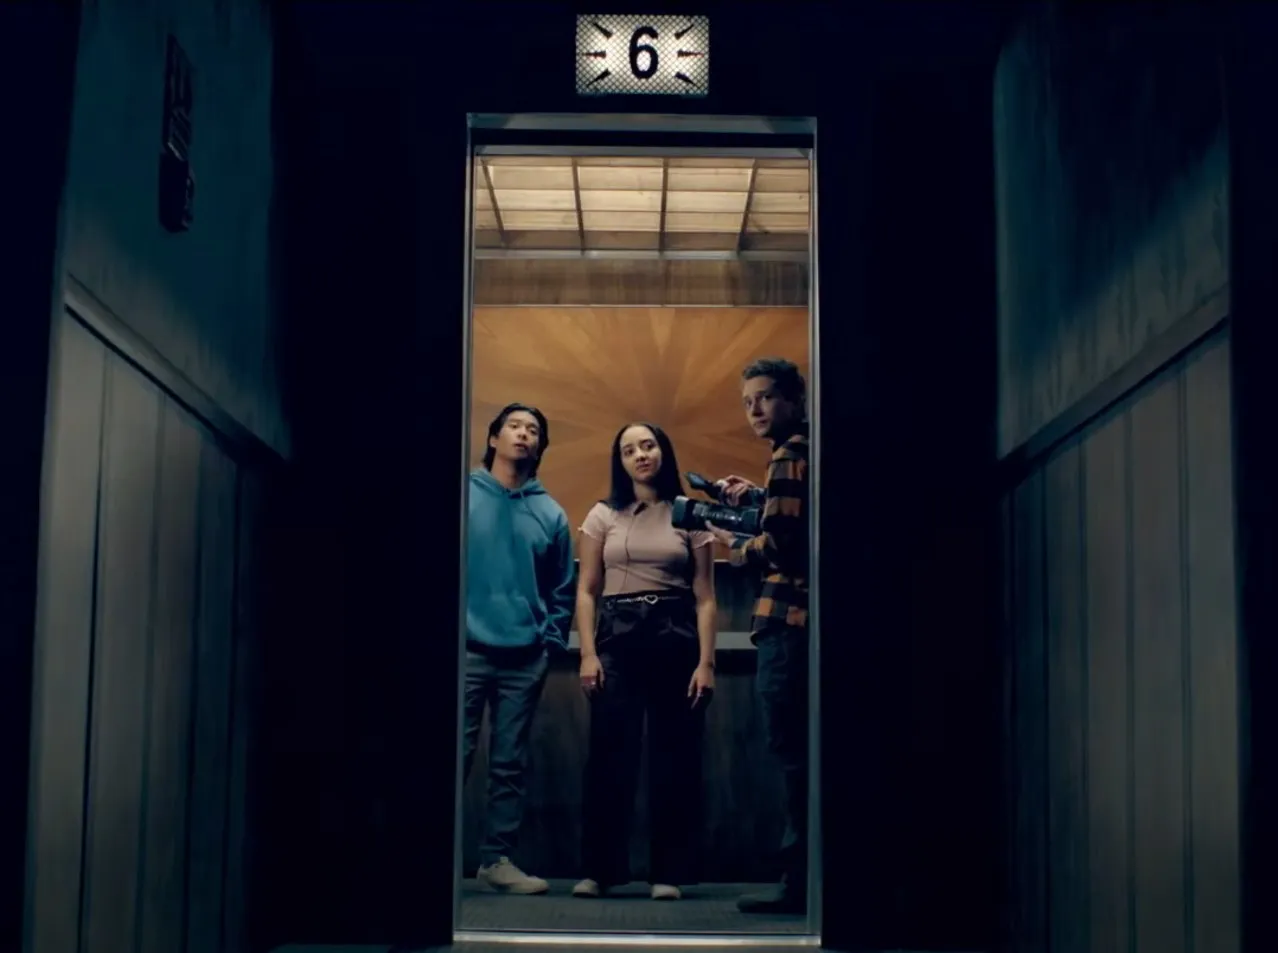 Elevator Game Trailer and Poster Preview Shudder’s Urban Legend Horror Movie